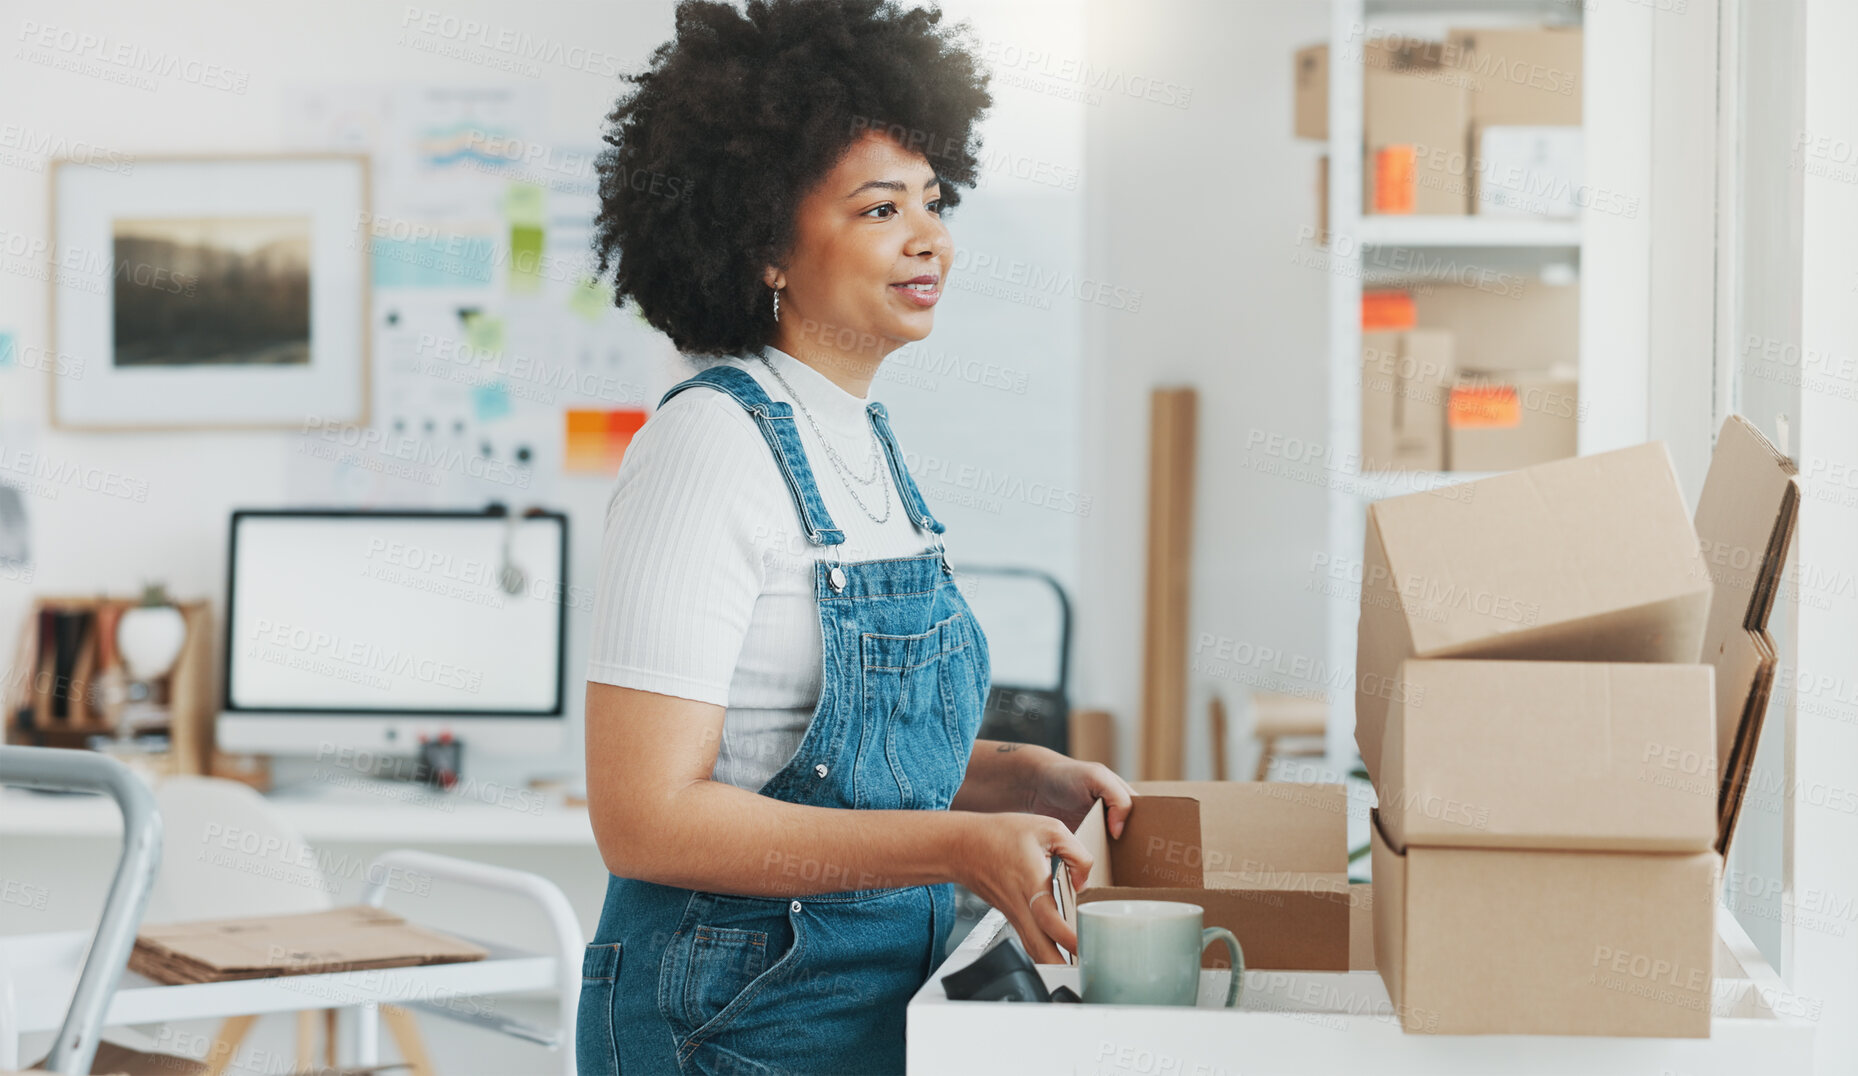 Buy stock photo Ecommerce, happy woman with boxes thinking in office for sales and delivery, seller at creative startup with smile. Online shopping, package and small business owner with product ideas at web store.